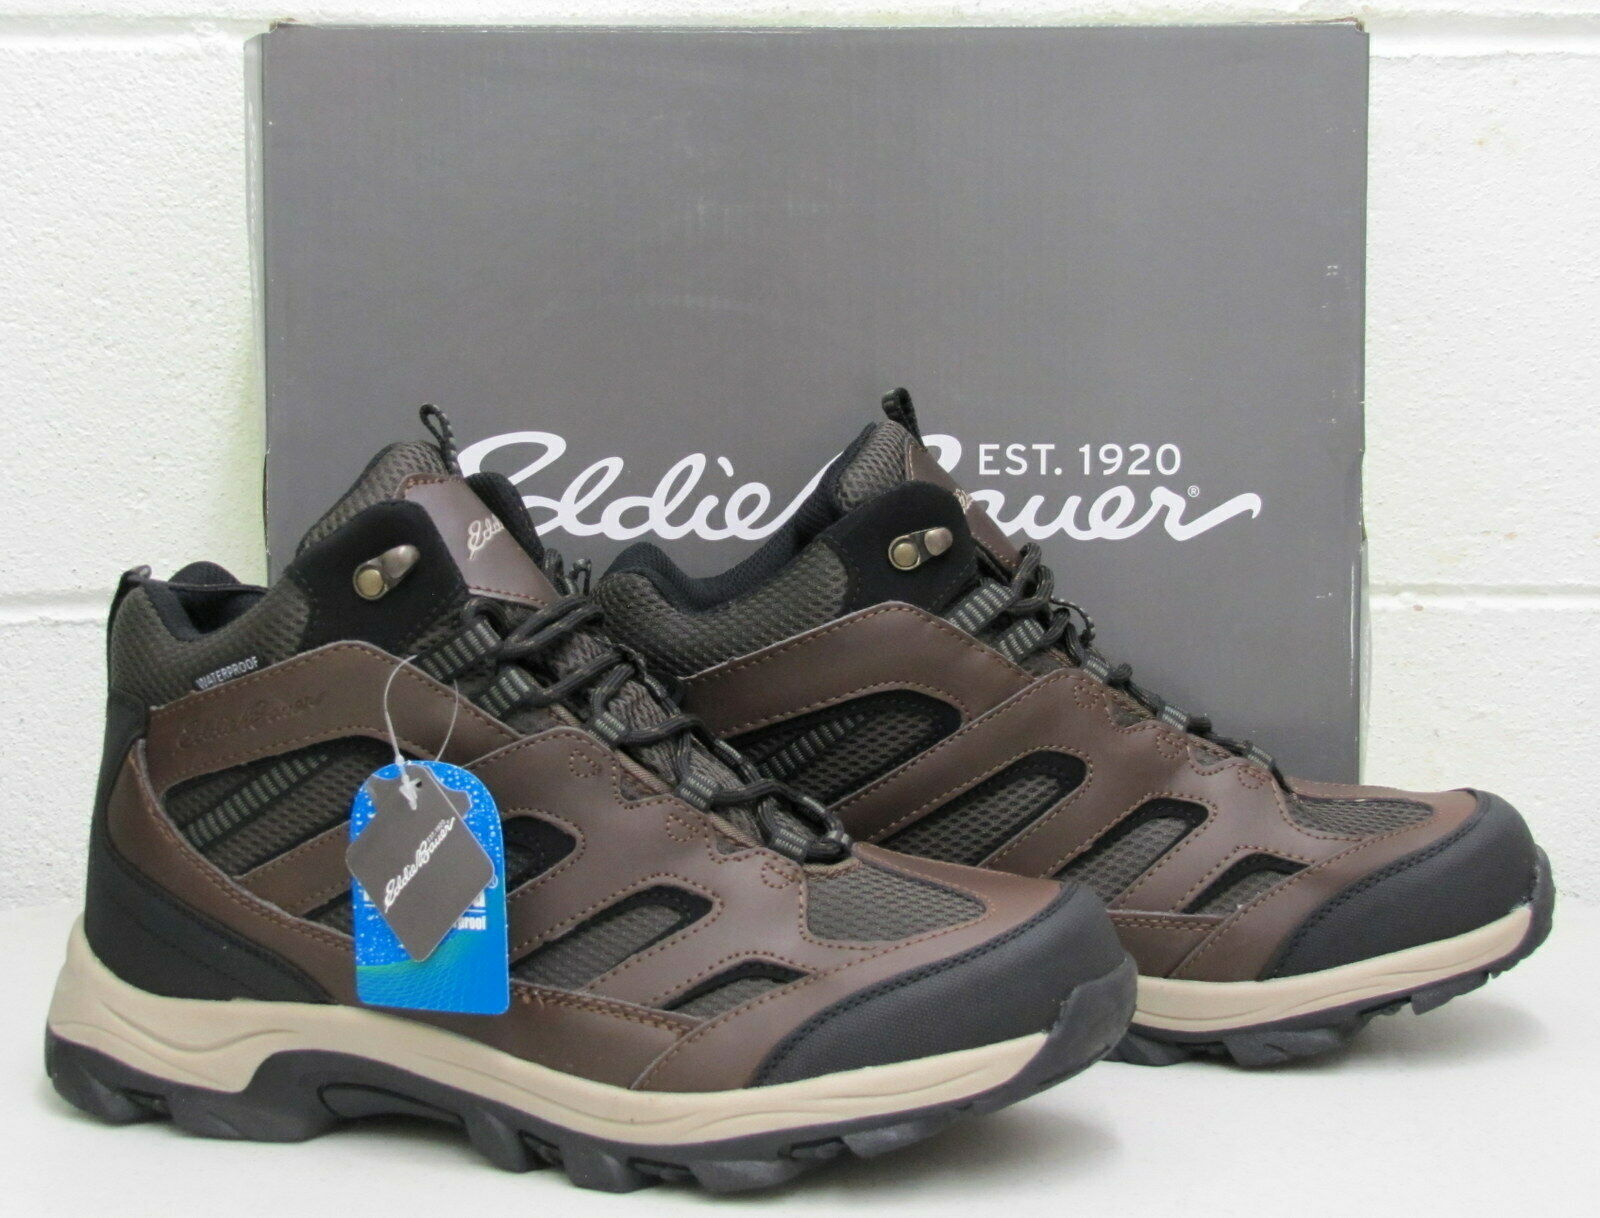 Eddie Bauer Men's Graham Hiking Boots Shoes Leather Waterproof Brown Size 10 New